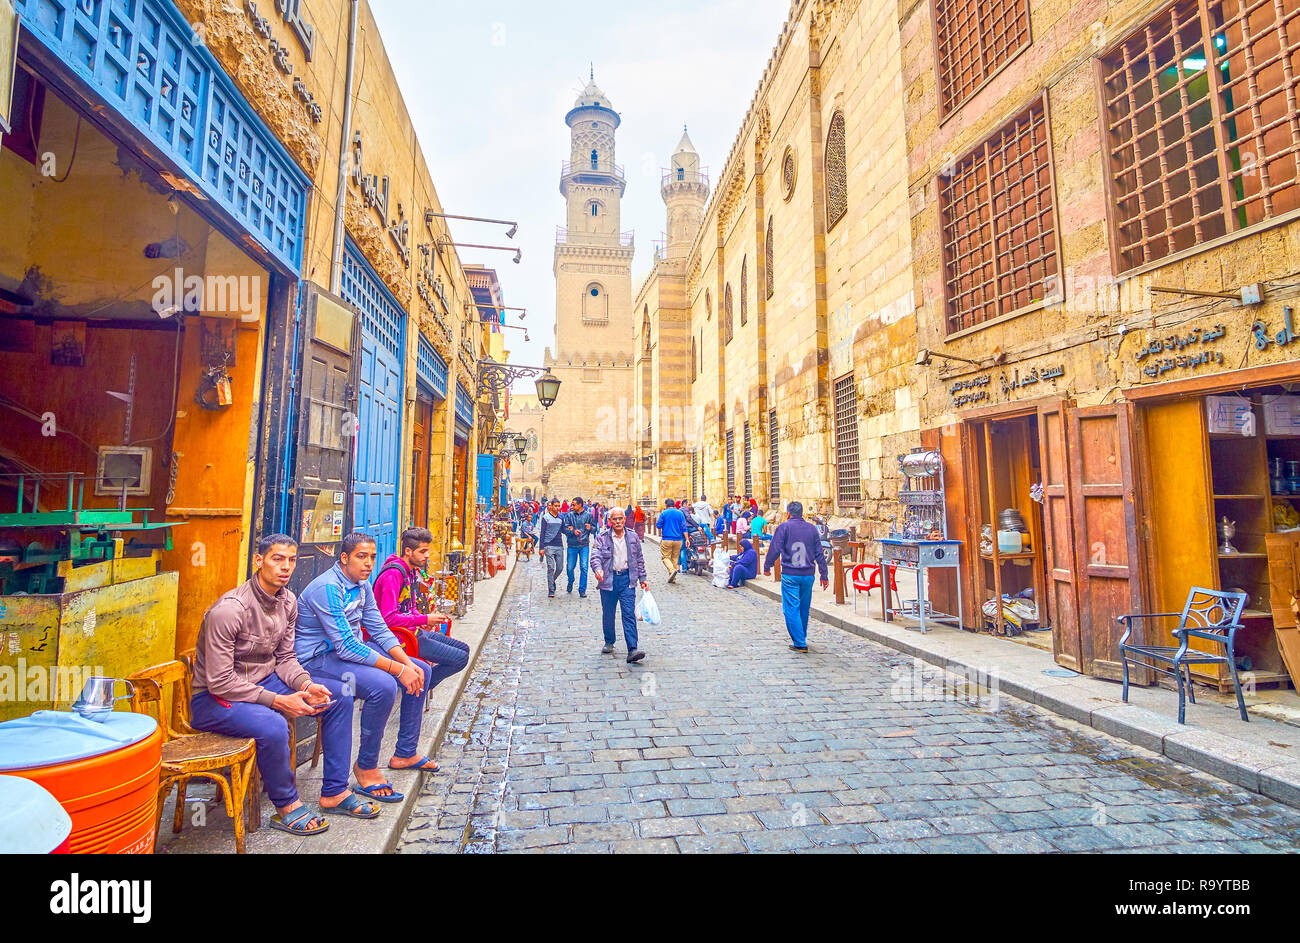 CAIRO, EGYPT - DECEMBER 20, 2017: The merchants from small shop rest sitting on the street with a view on medieval edifices, on December 20 in Cairo. Stock Photo